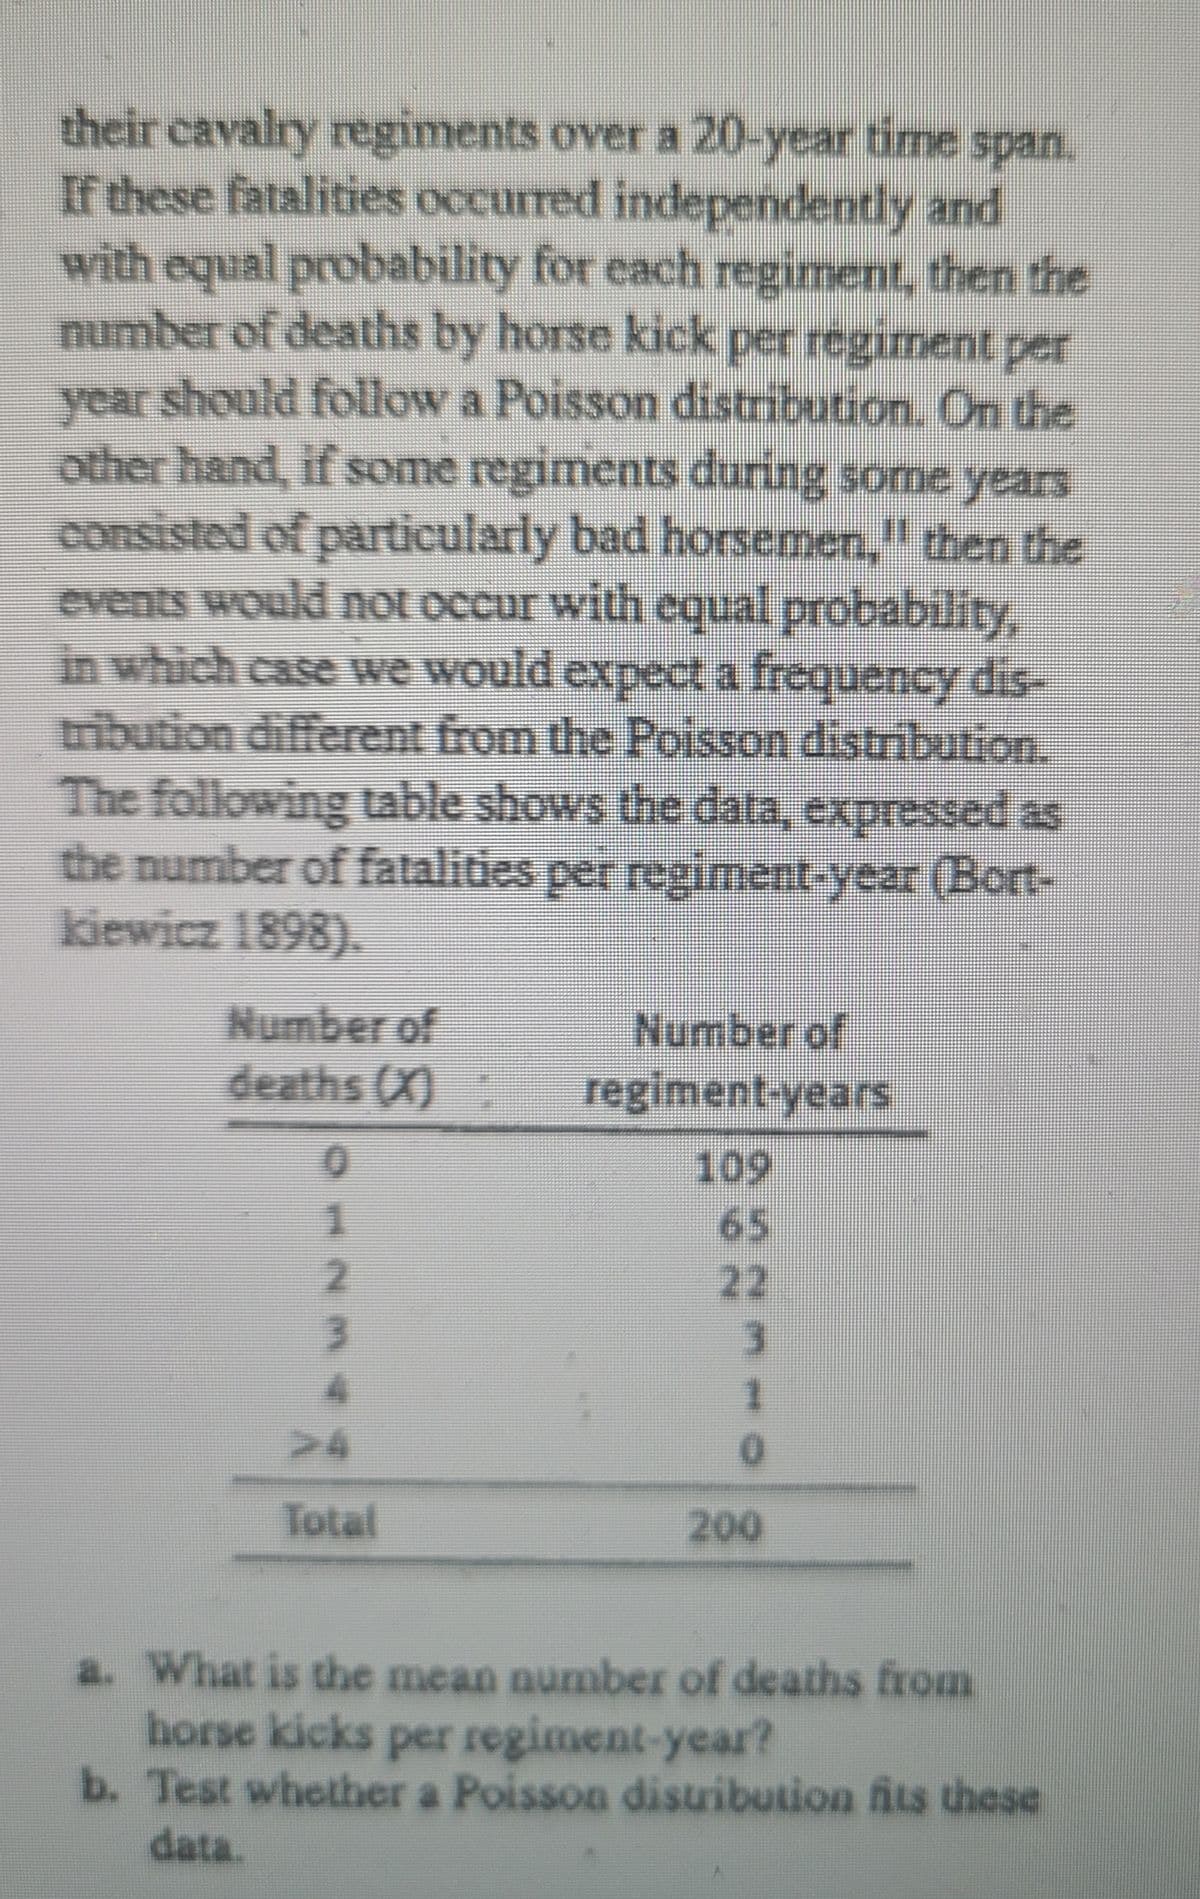 their cavalry regiments over a 20-year time span.
If these fatalities occurred independently and
with equal probability for cach regiment, then the
number of deaths by horse kick per regiment per
year should follow a Poisson distribution. On the
other hand, if some regiments during some years
consisted of particularly bad horsemen, then the
events would not occur with equal probability,
in which case we would expect a frequency dis-
tribution different from the Poisson distribution.
The following table shows the data, expressed as
the number of fatalities per regiiment-year (Bort-
kiewicz 1898).
Number of
deaths (X)
Number of
regiment-years
109
65
22
1.
24
Total
200
a. What is the mean number of deaths from
horse kicks per regiment-year?
b. Test whether a Poisson disuibution fits these
data.
012
